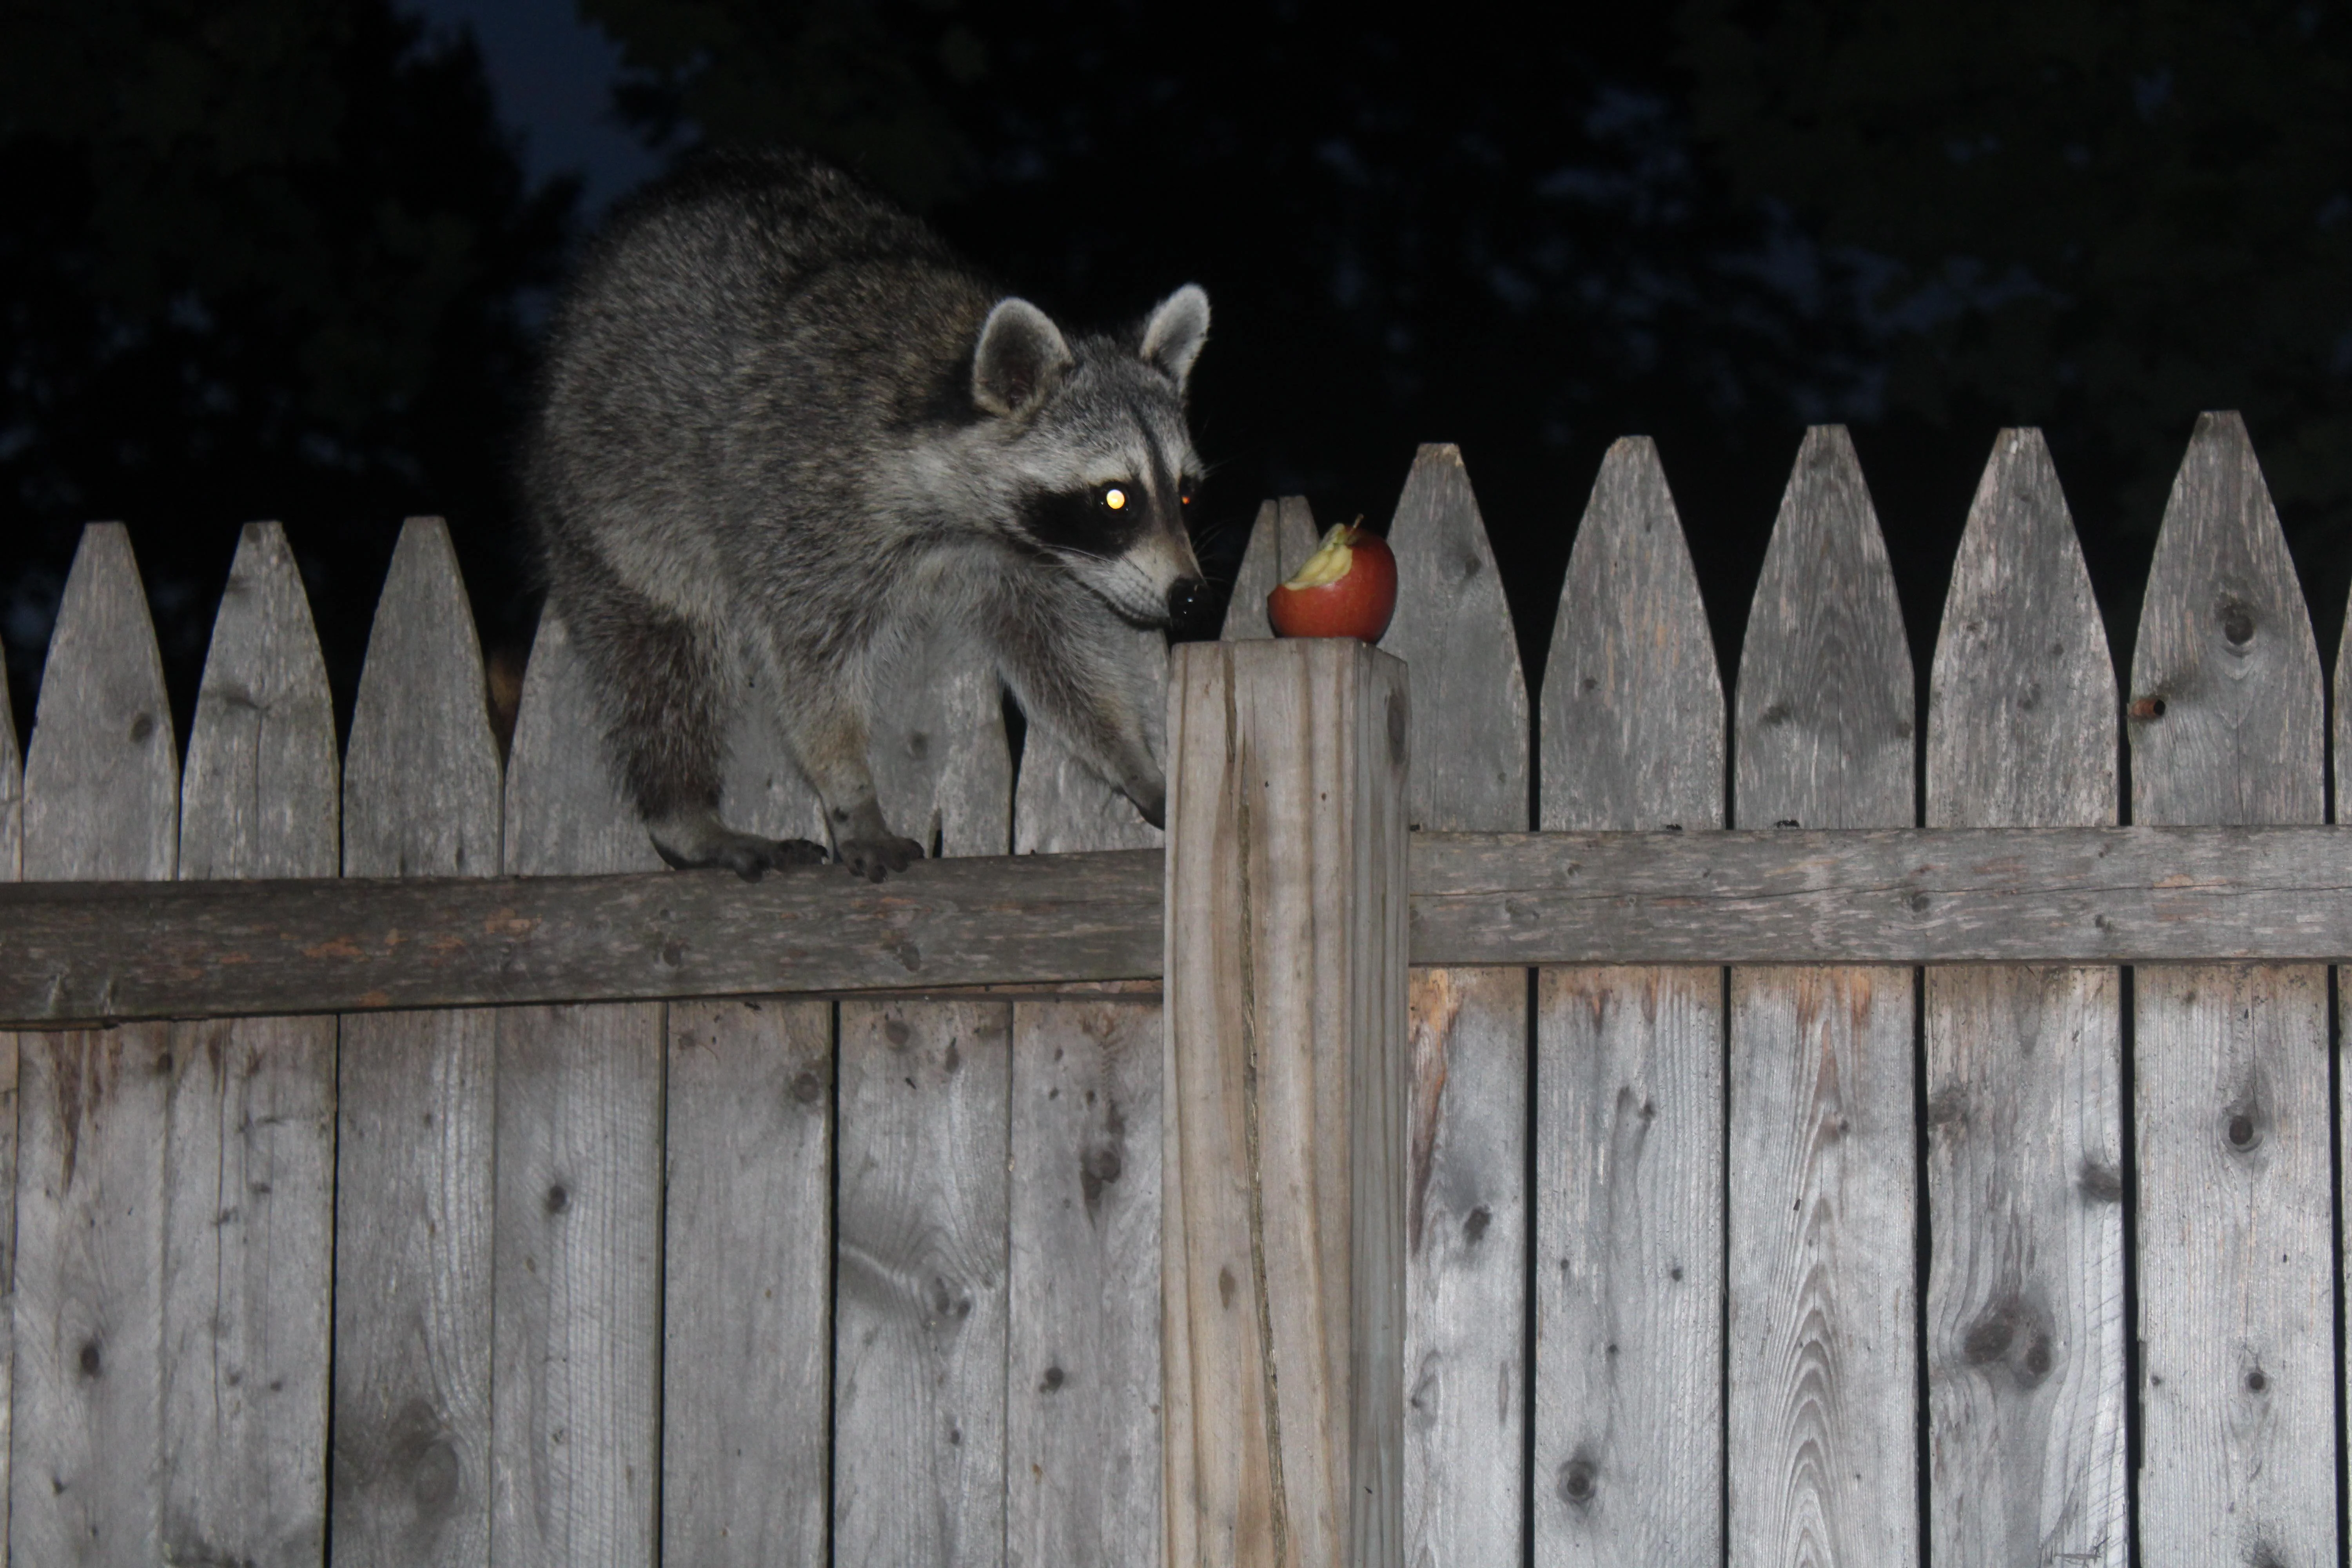 Raccoon going for the apple.